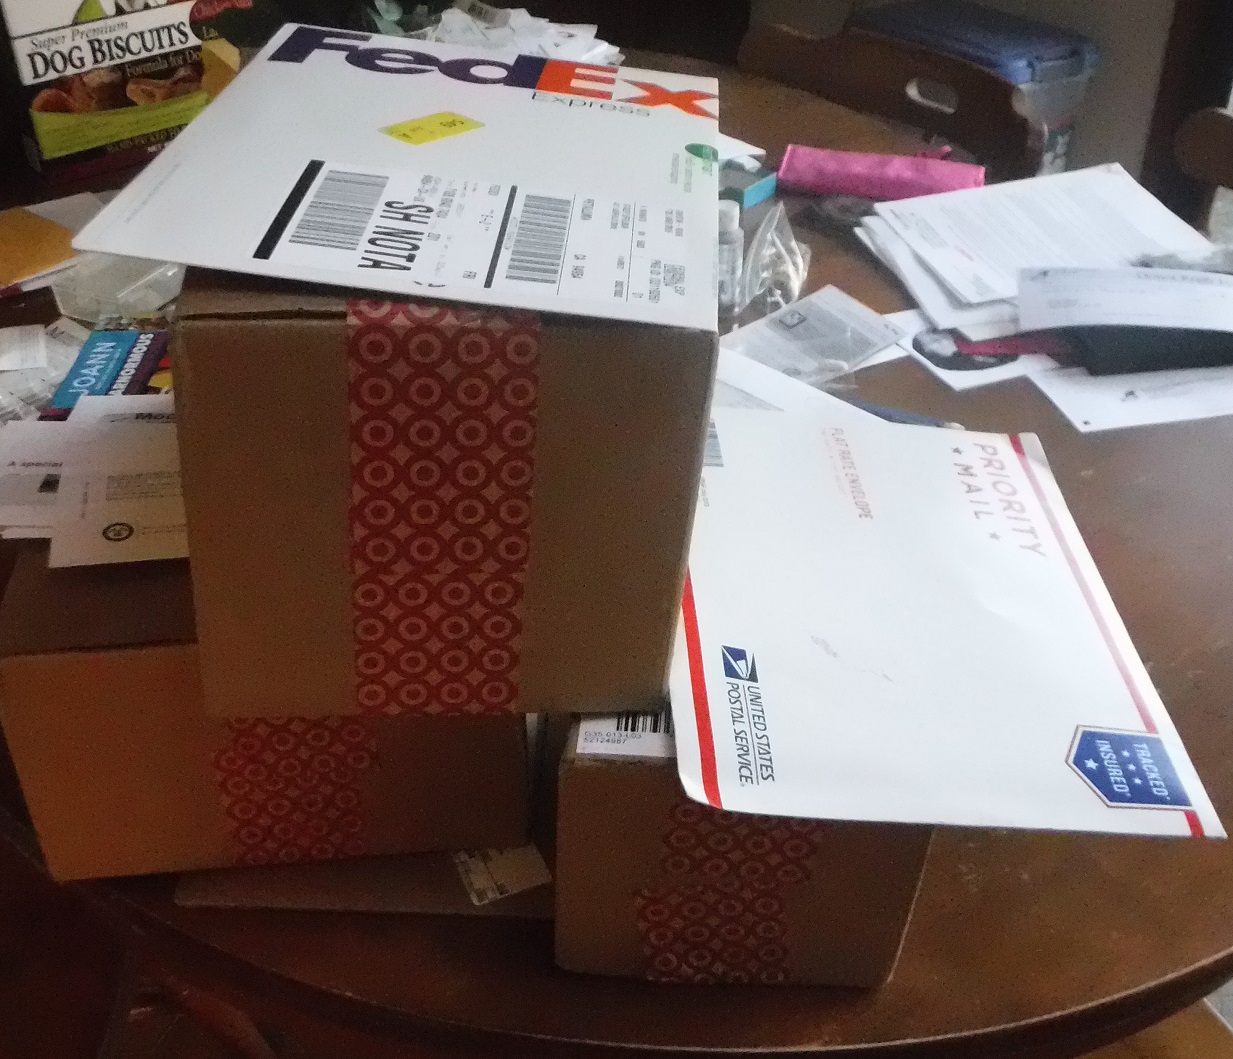 Photo I took of packages on my kitchen table